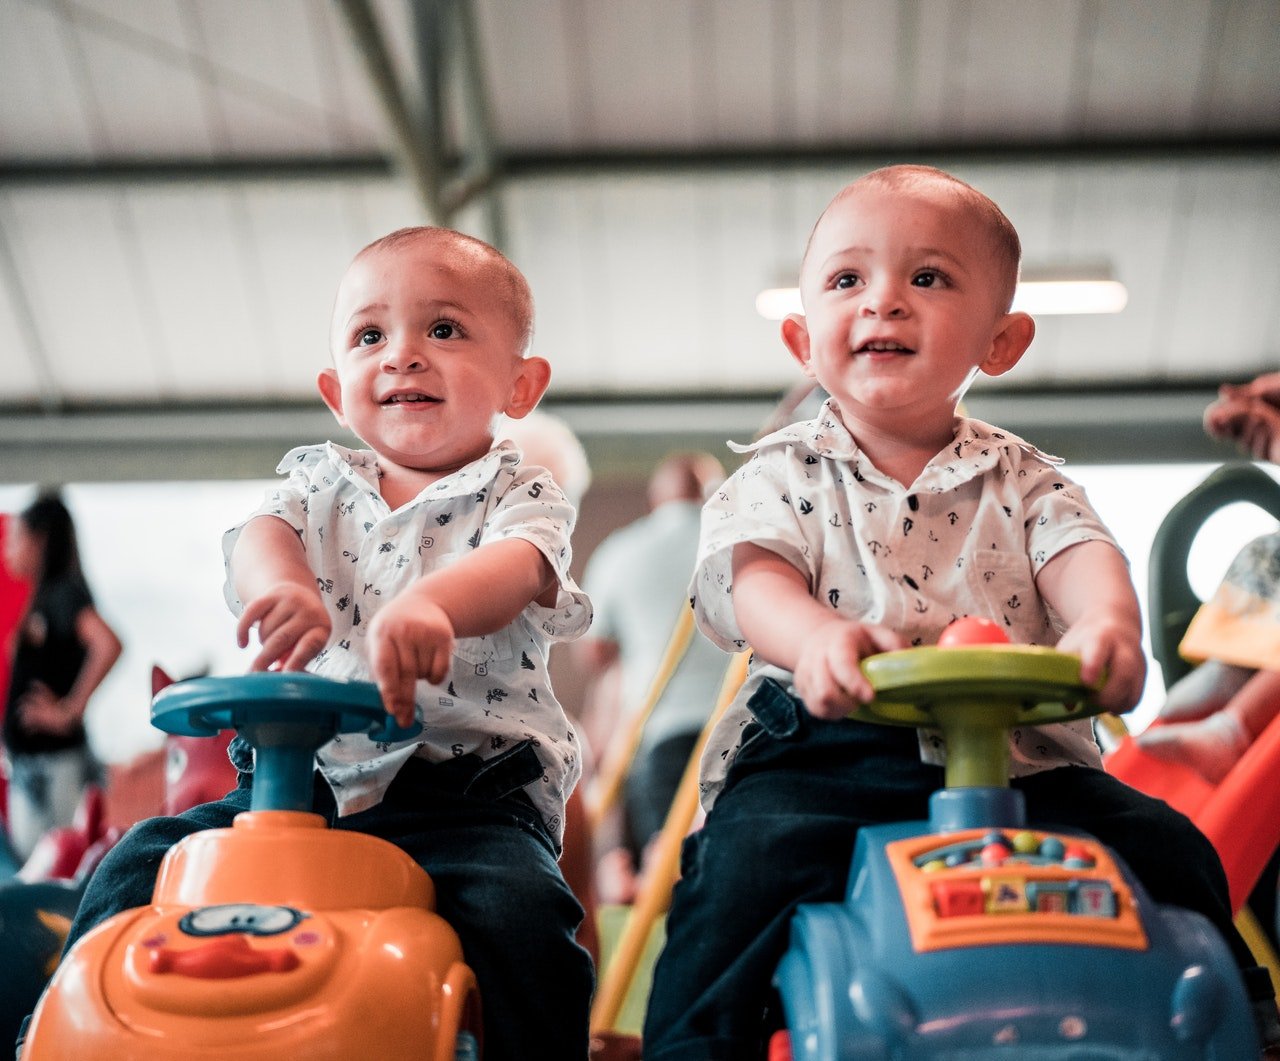 Twin babies sitting on toy cars | Source: Pexels